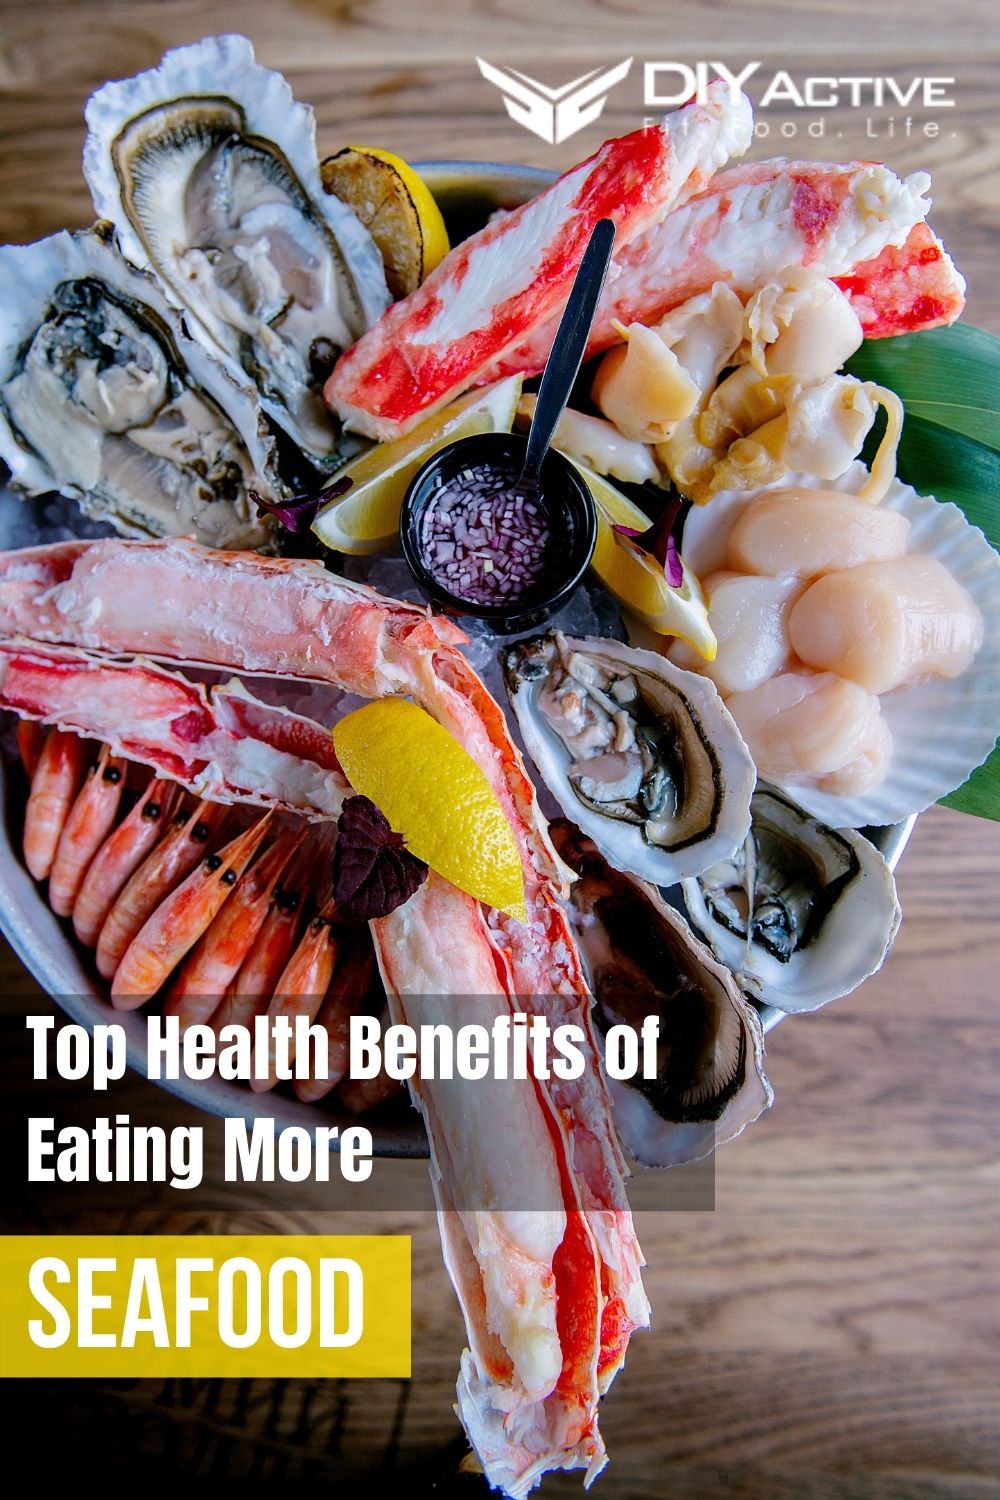 Top 5 Health Benefits of Eating More Seafood 2